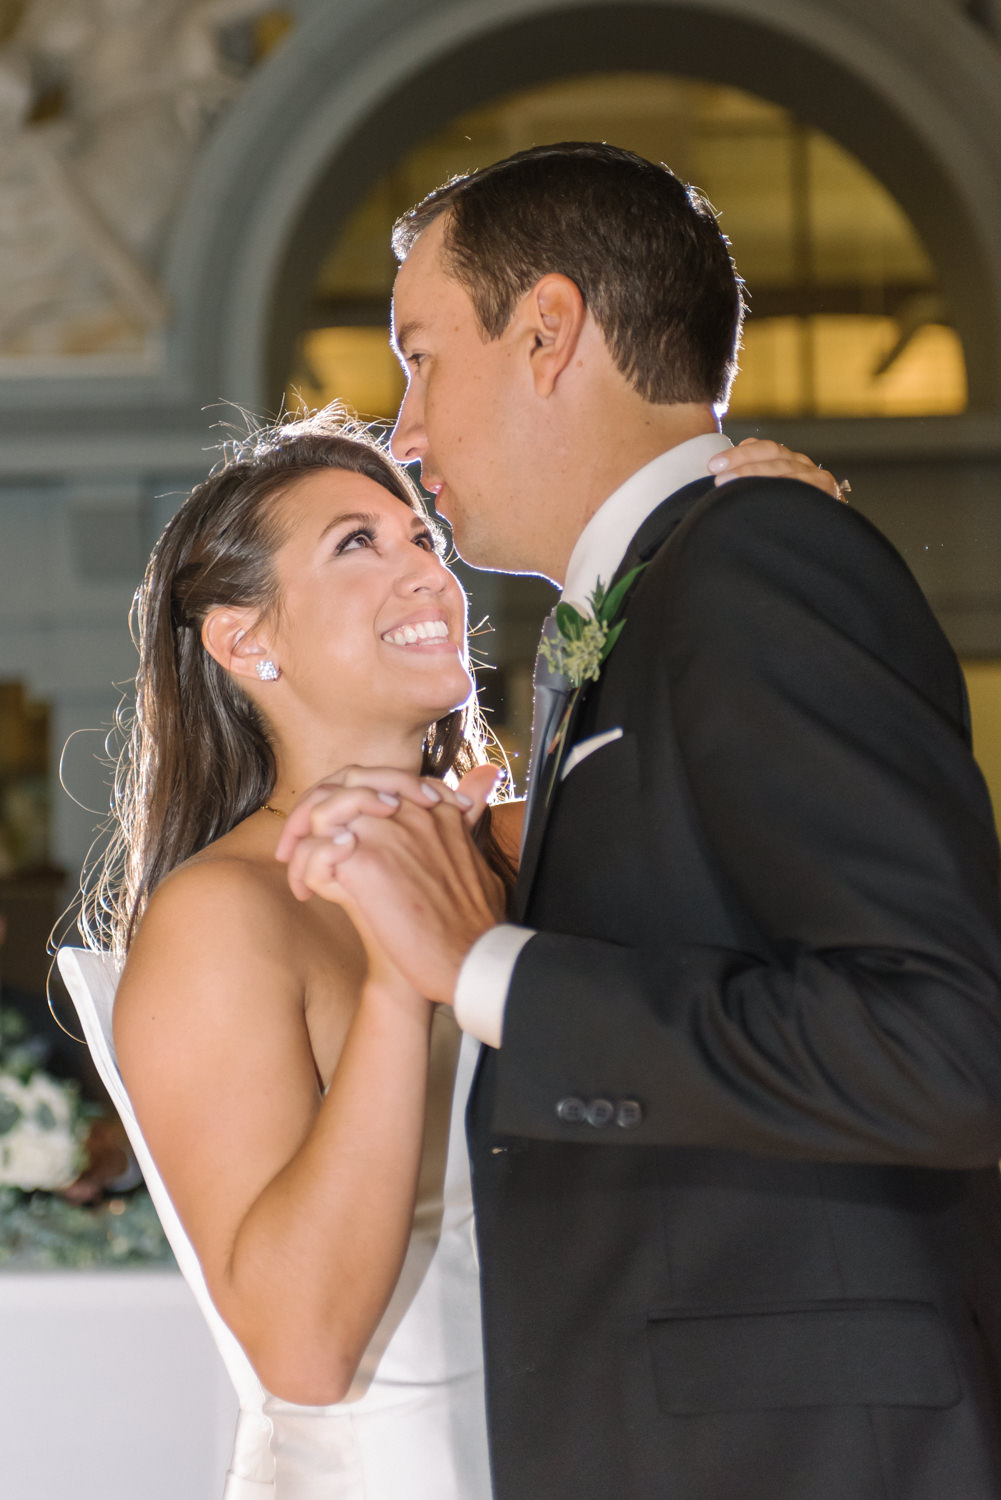 Bride and groom first dance at St. Louis Old Post Office and Custom House; St. Louis fine art film wedding photographer Erica Robnett Photography